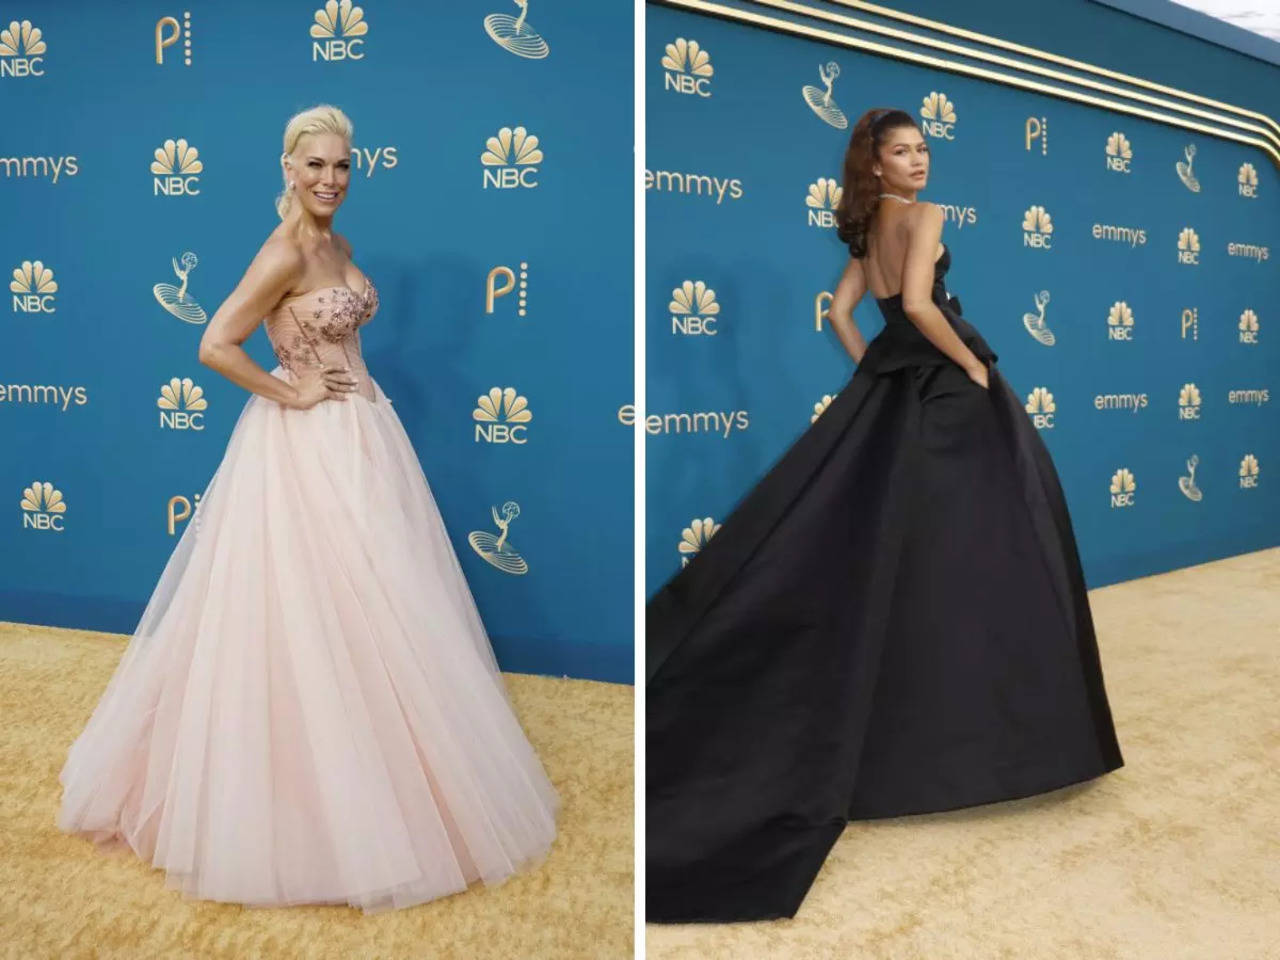 Emmys Red Carpet Fashion Trends: Bright Colors, Bold Choices Rule